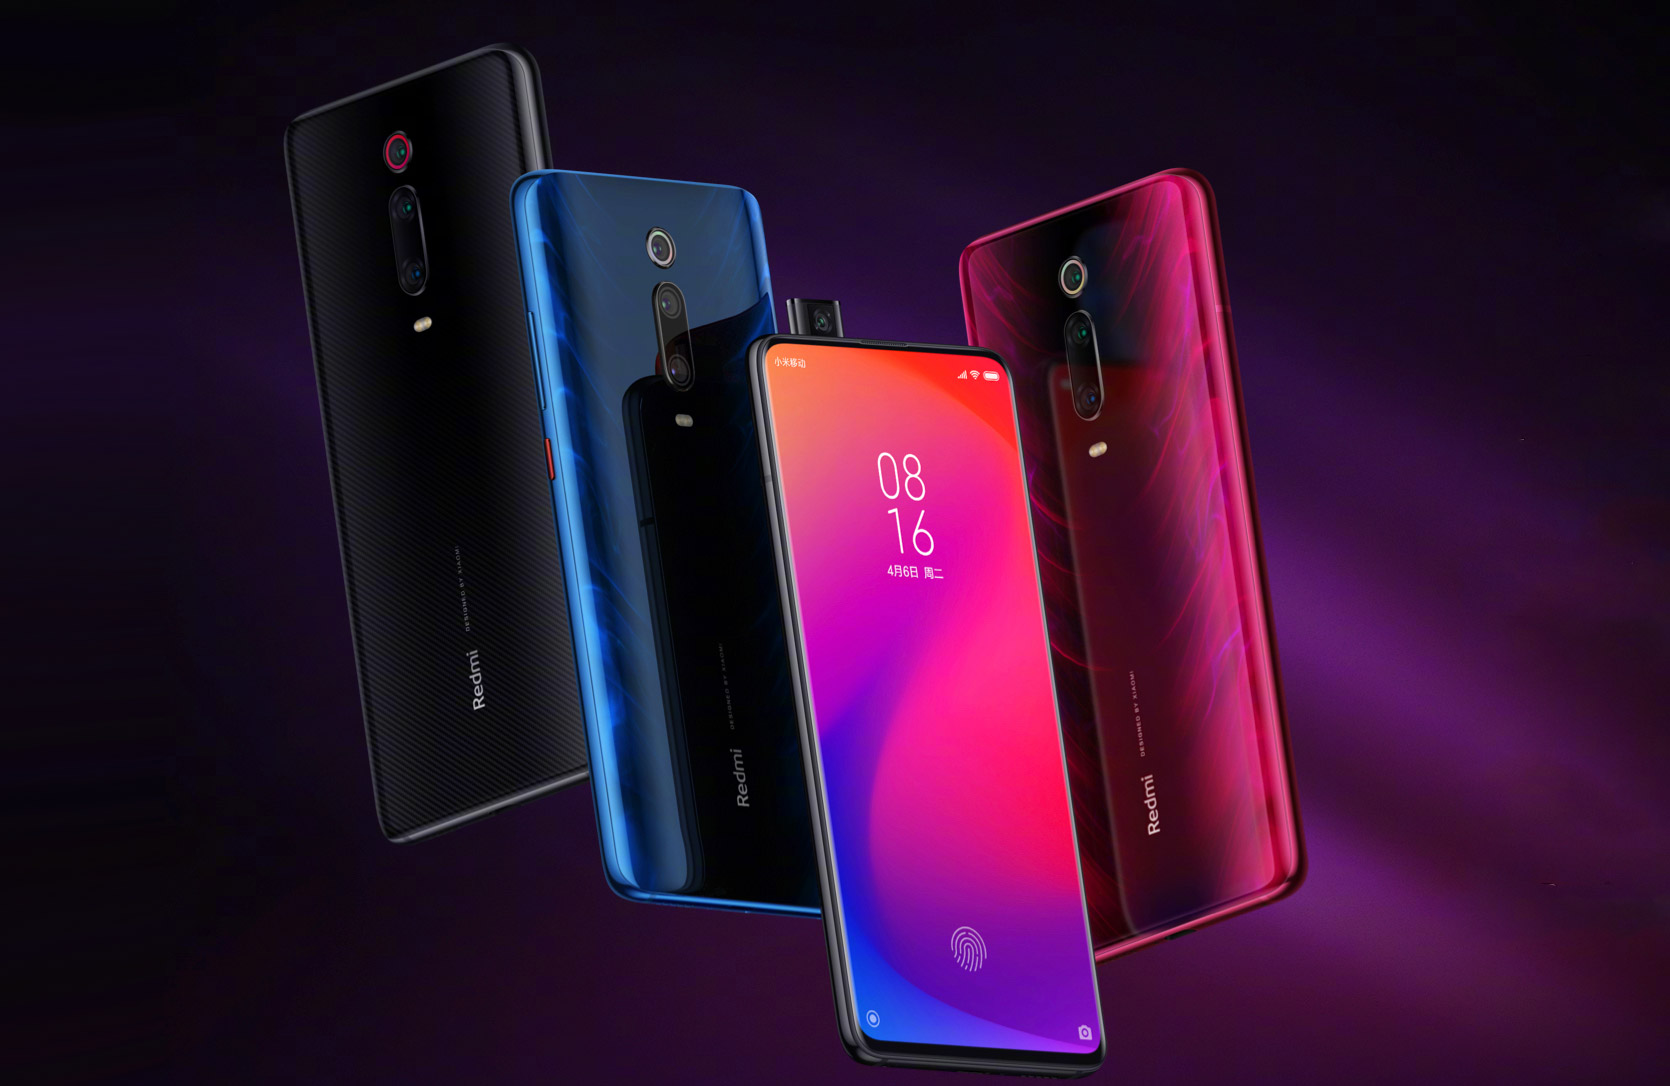 Xiaomi launches its Flagship Redmi K20 series and Redmi 7A in Chandigarh